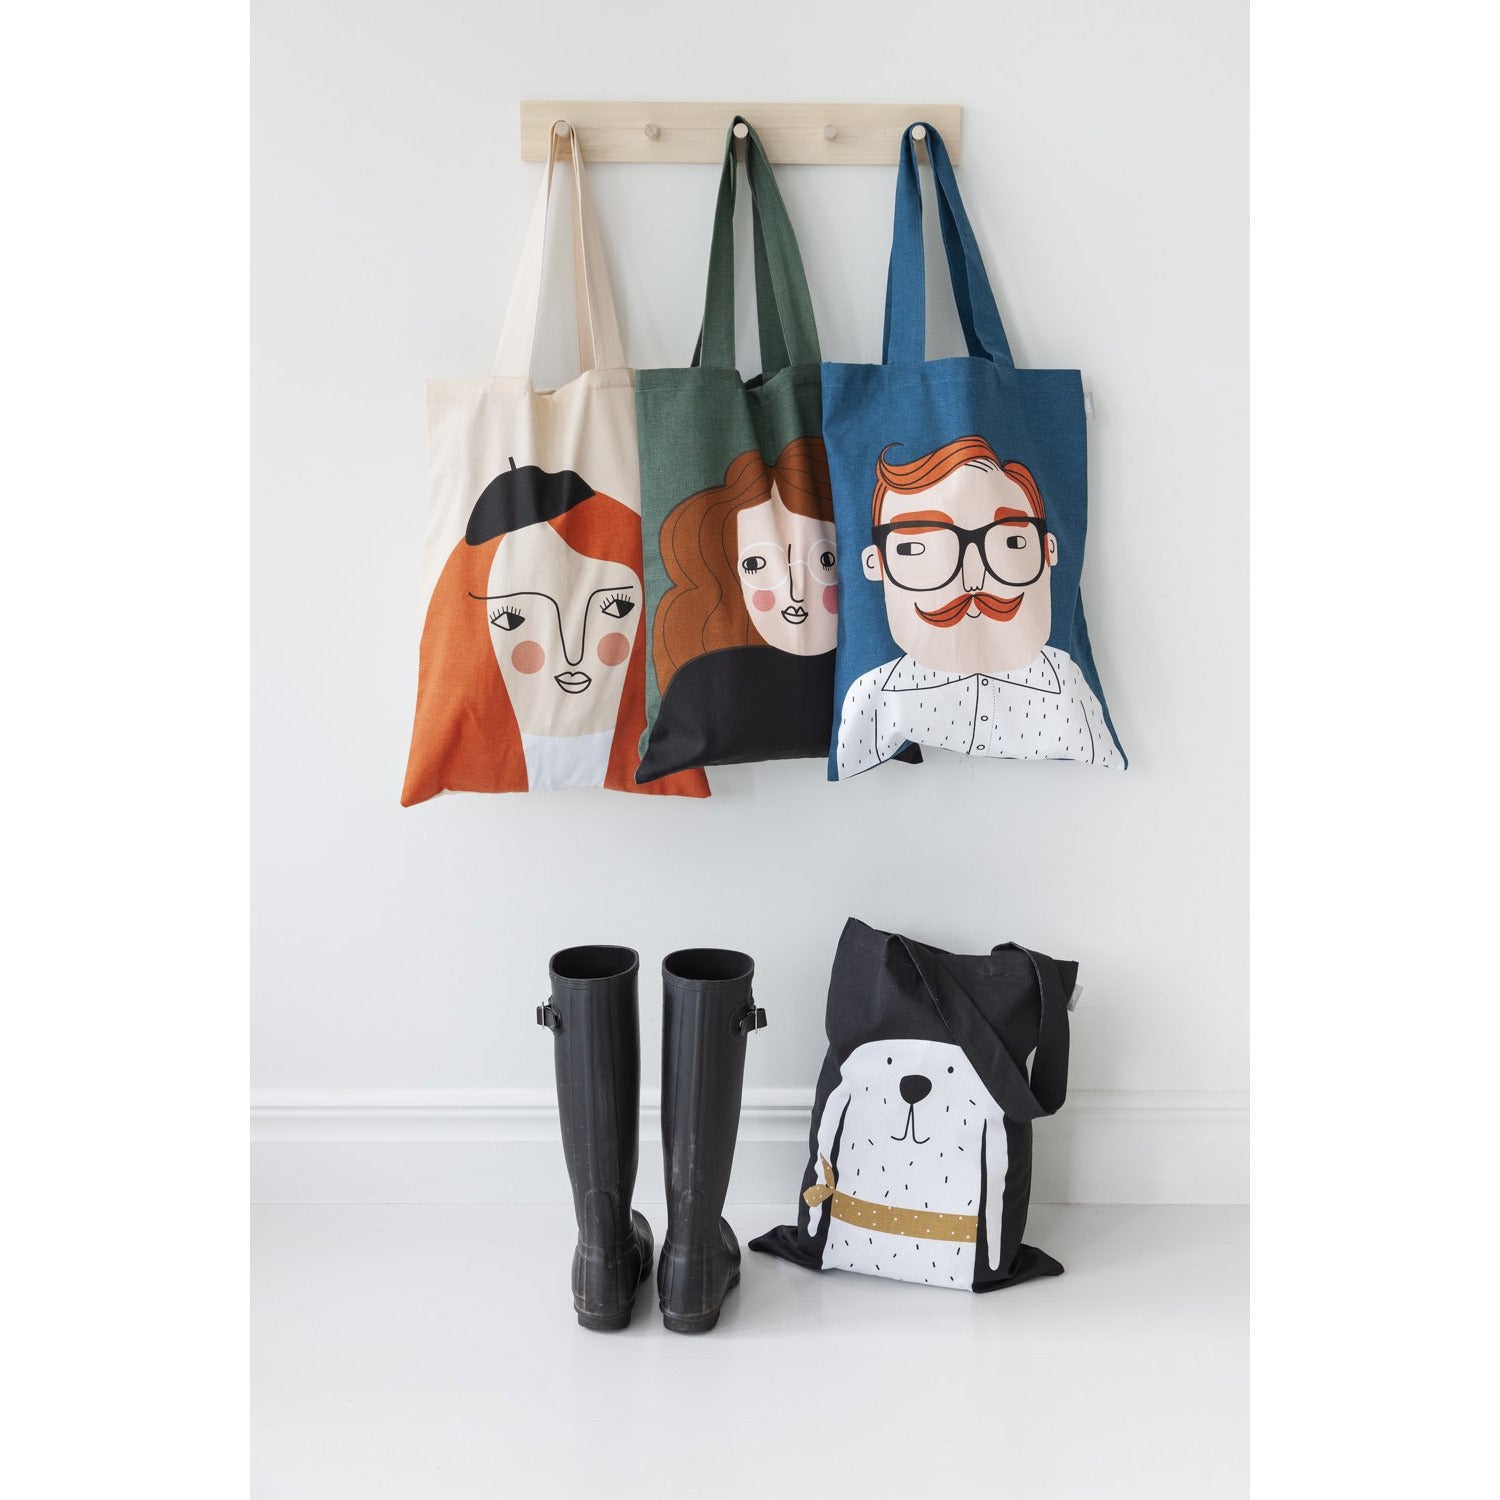 Three tote bags hang on wooden hooks and one tote bag sits on the floor underneath next to a pair of black tall rain boots.